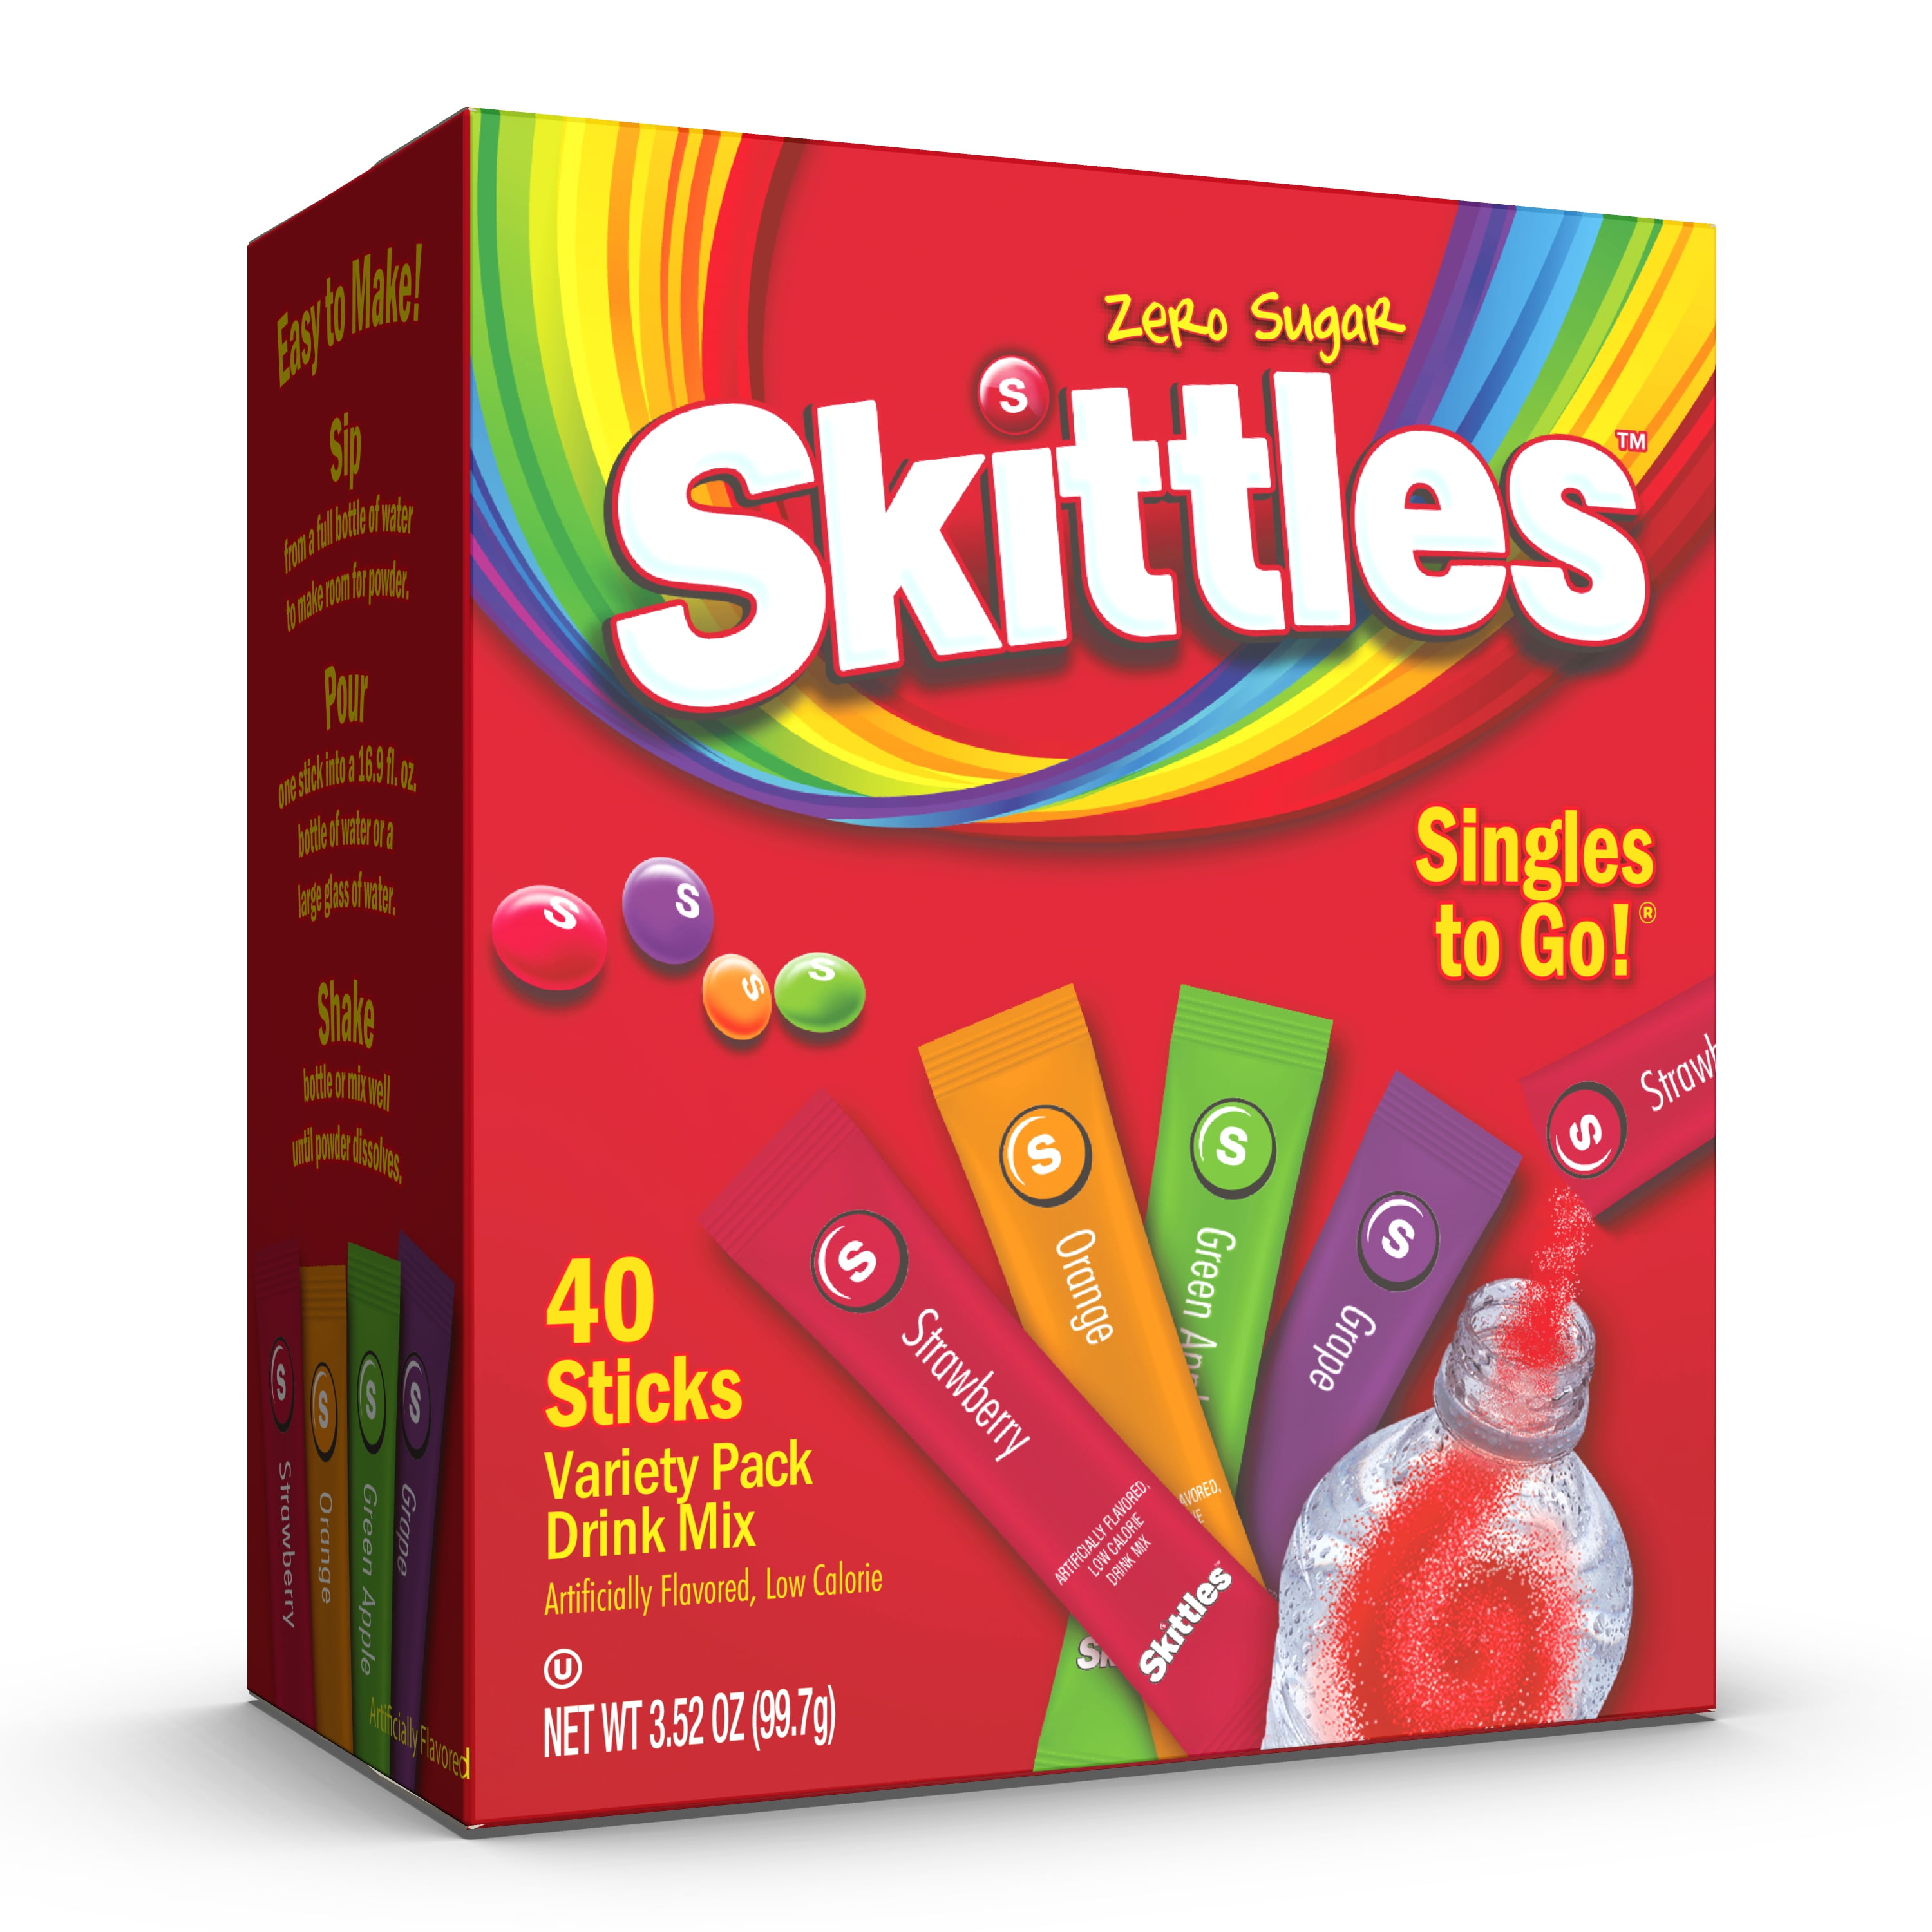 40 Packets) Skittles Variety Pack Sugar Free, On-The-Go, Caffeine